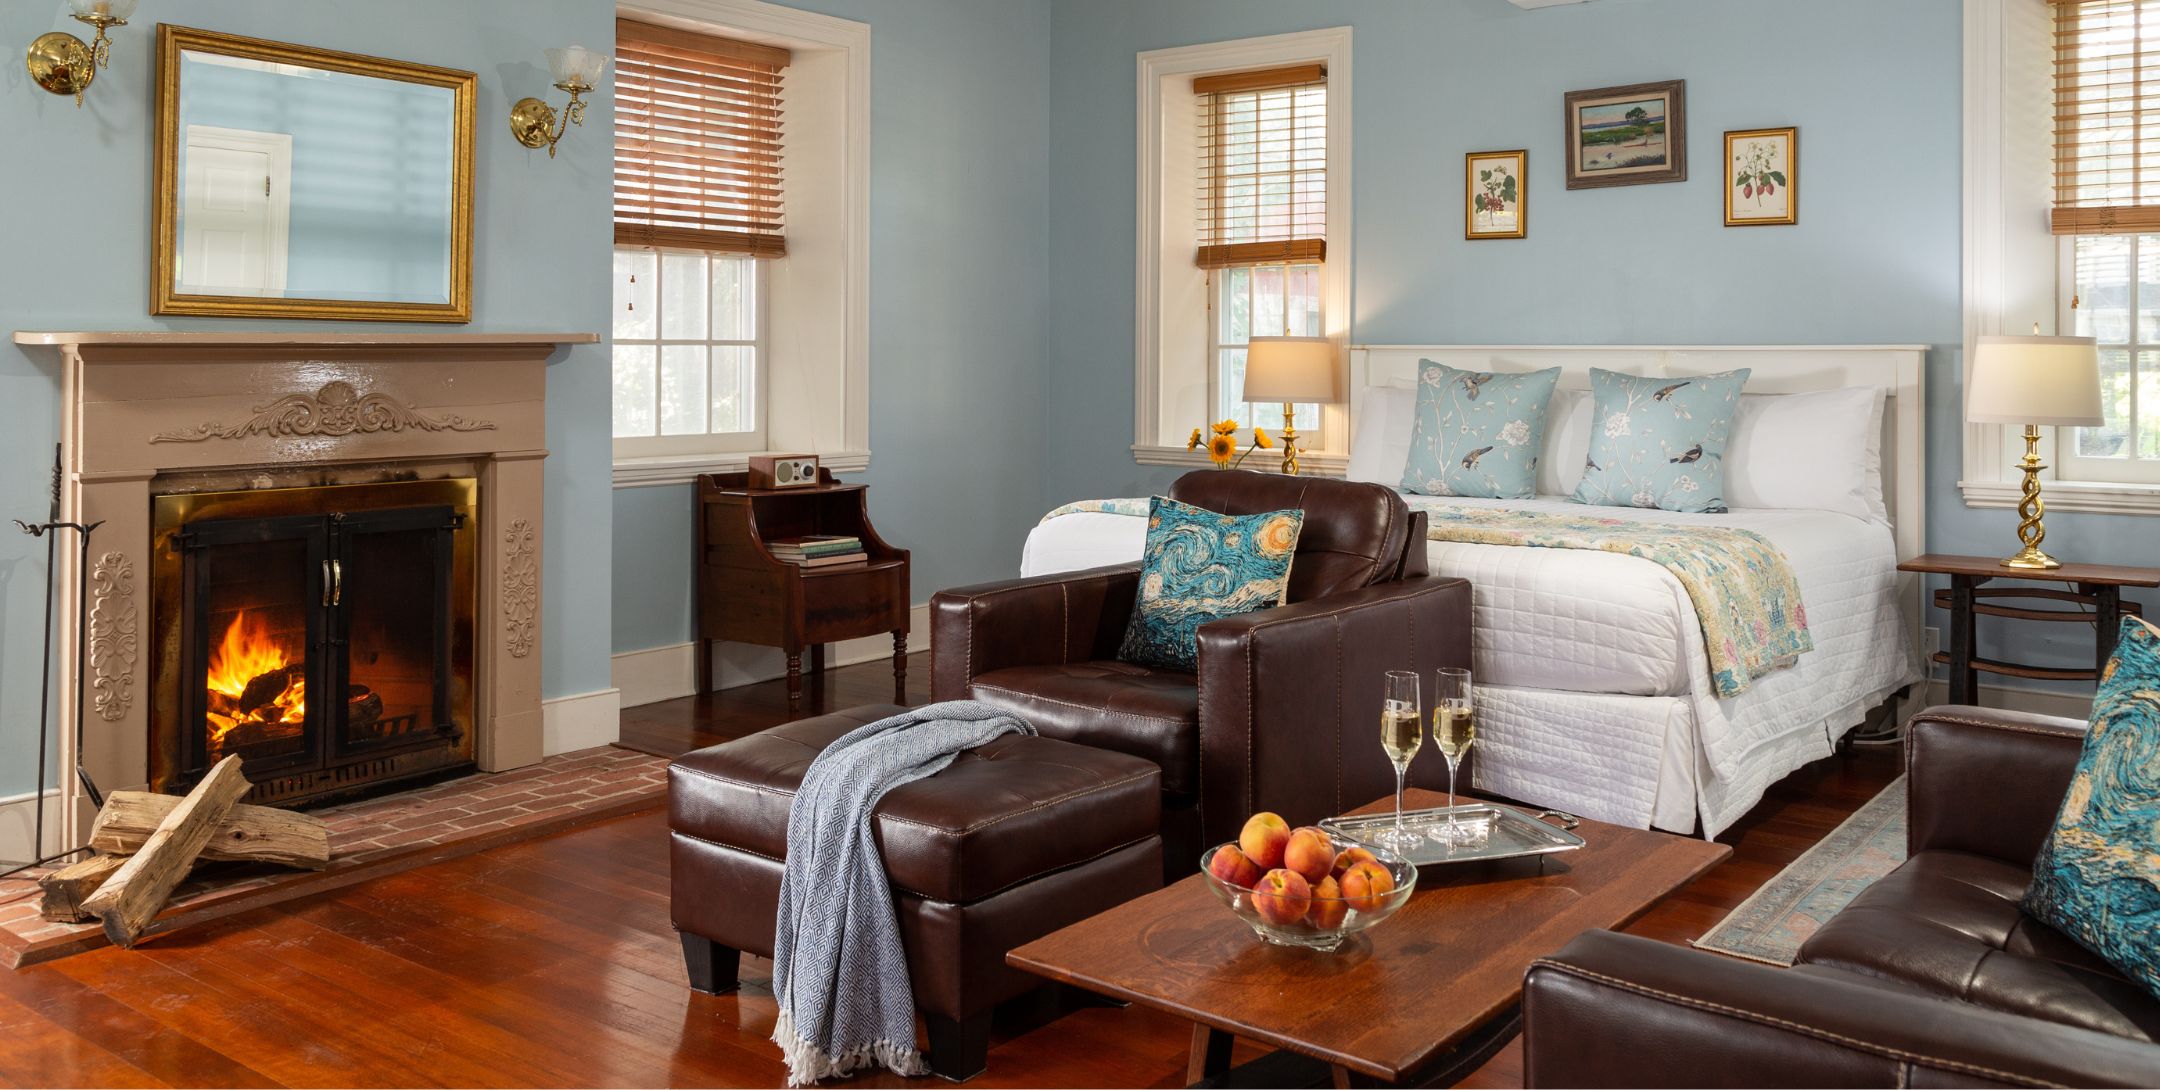 Light blue Sunrise Room with off-white king bed, natural light, fireplace with leather sitting area.